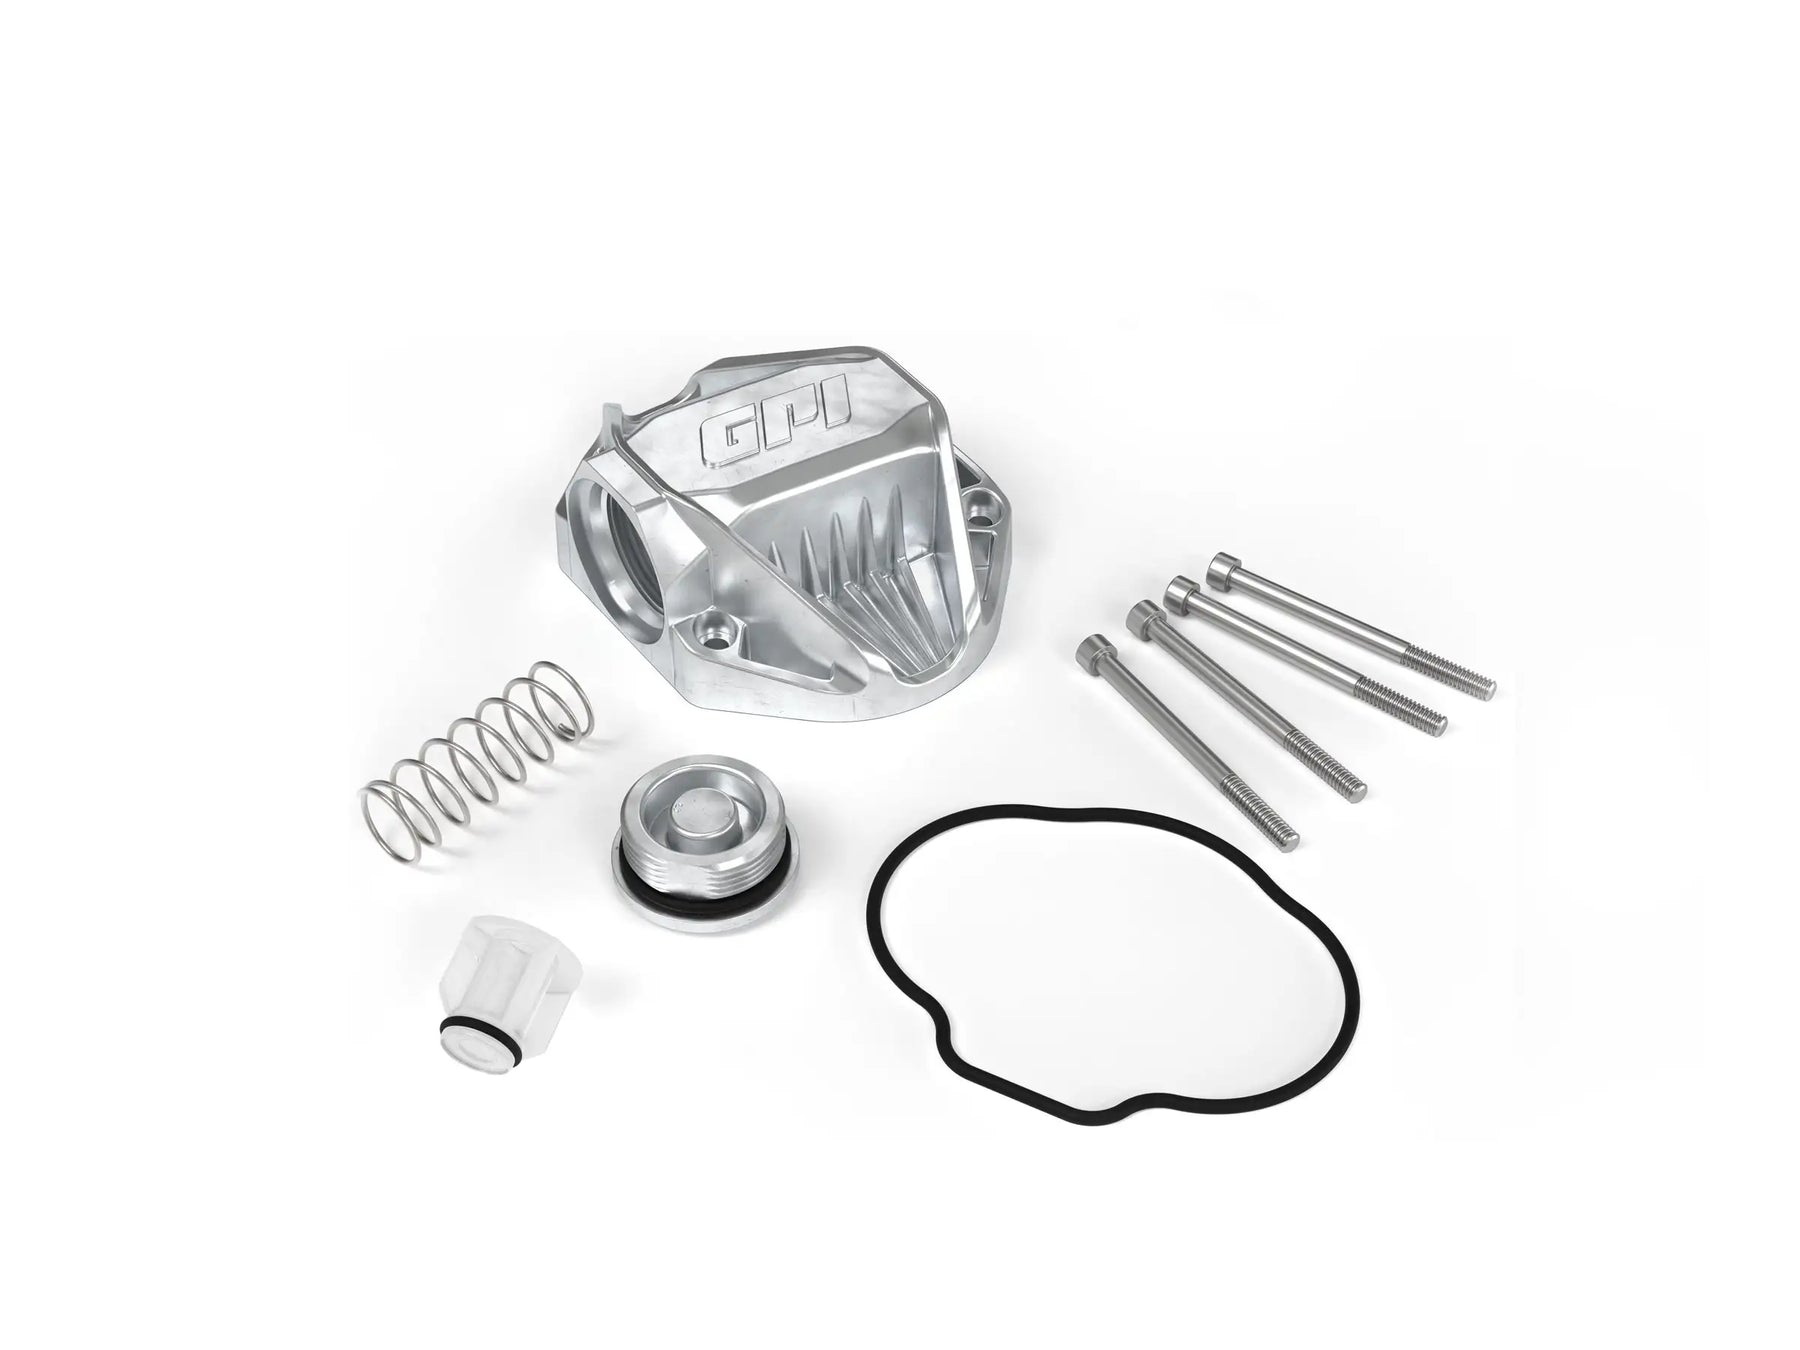 GPI-GPRO-FLOMEC Accessories and Maintenance Part Kits Now Available Online